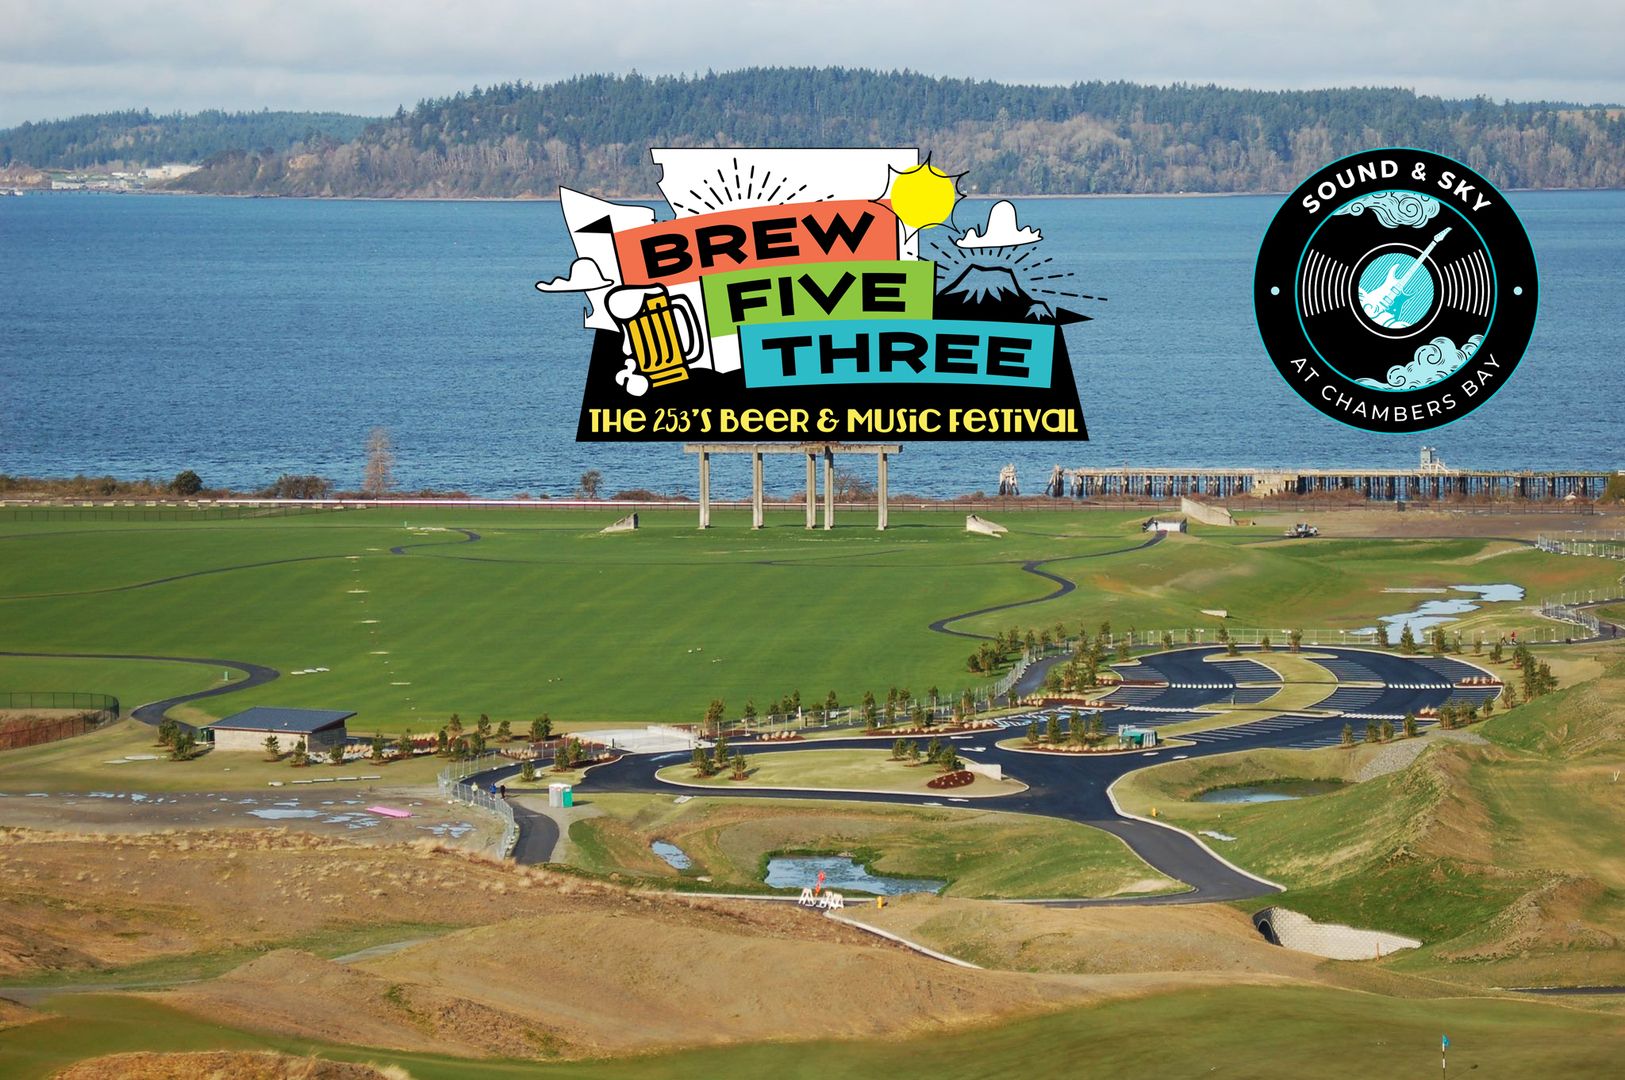 Sound & Sky at Chambers Bay: Brew Five Three: The 253's Beer & Music Festival, University Place, Washington, United States